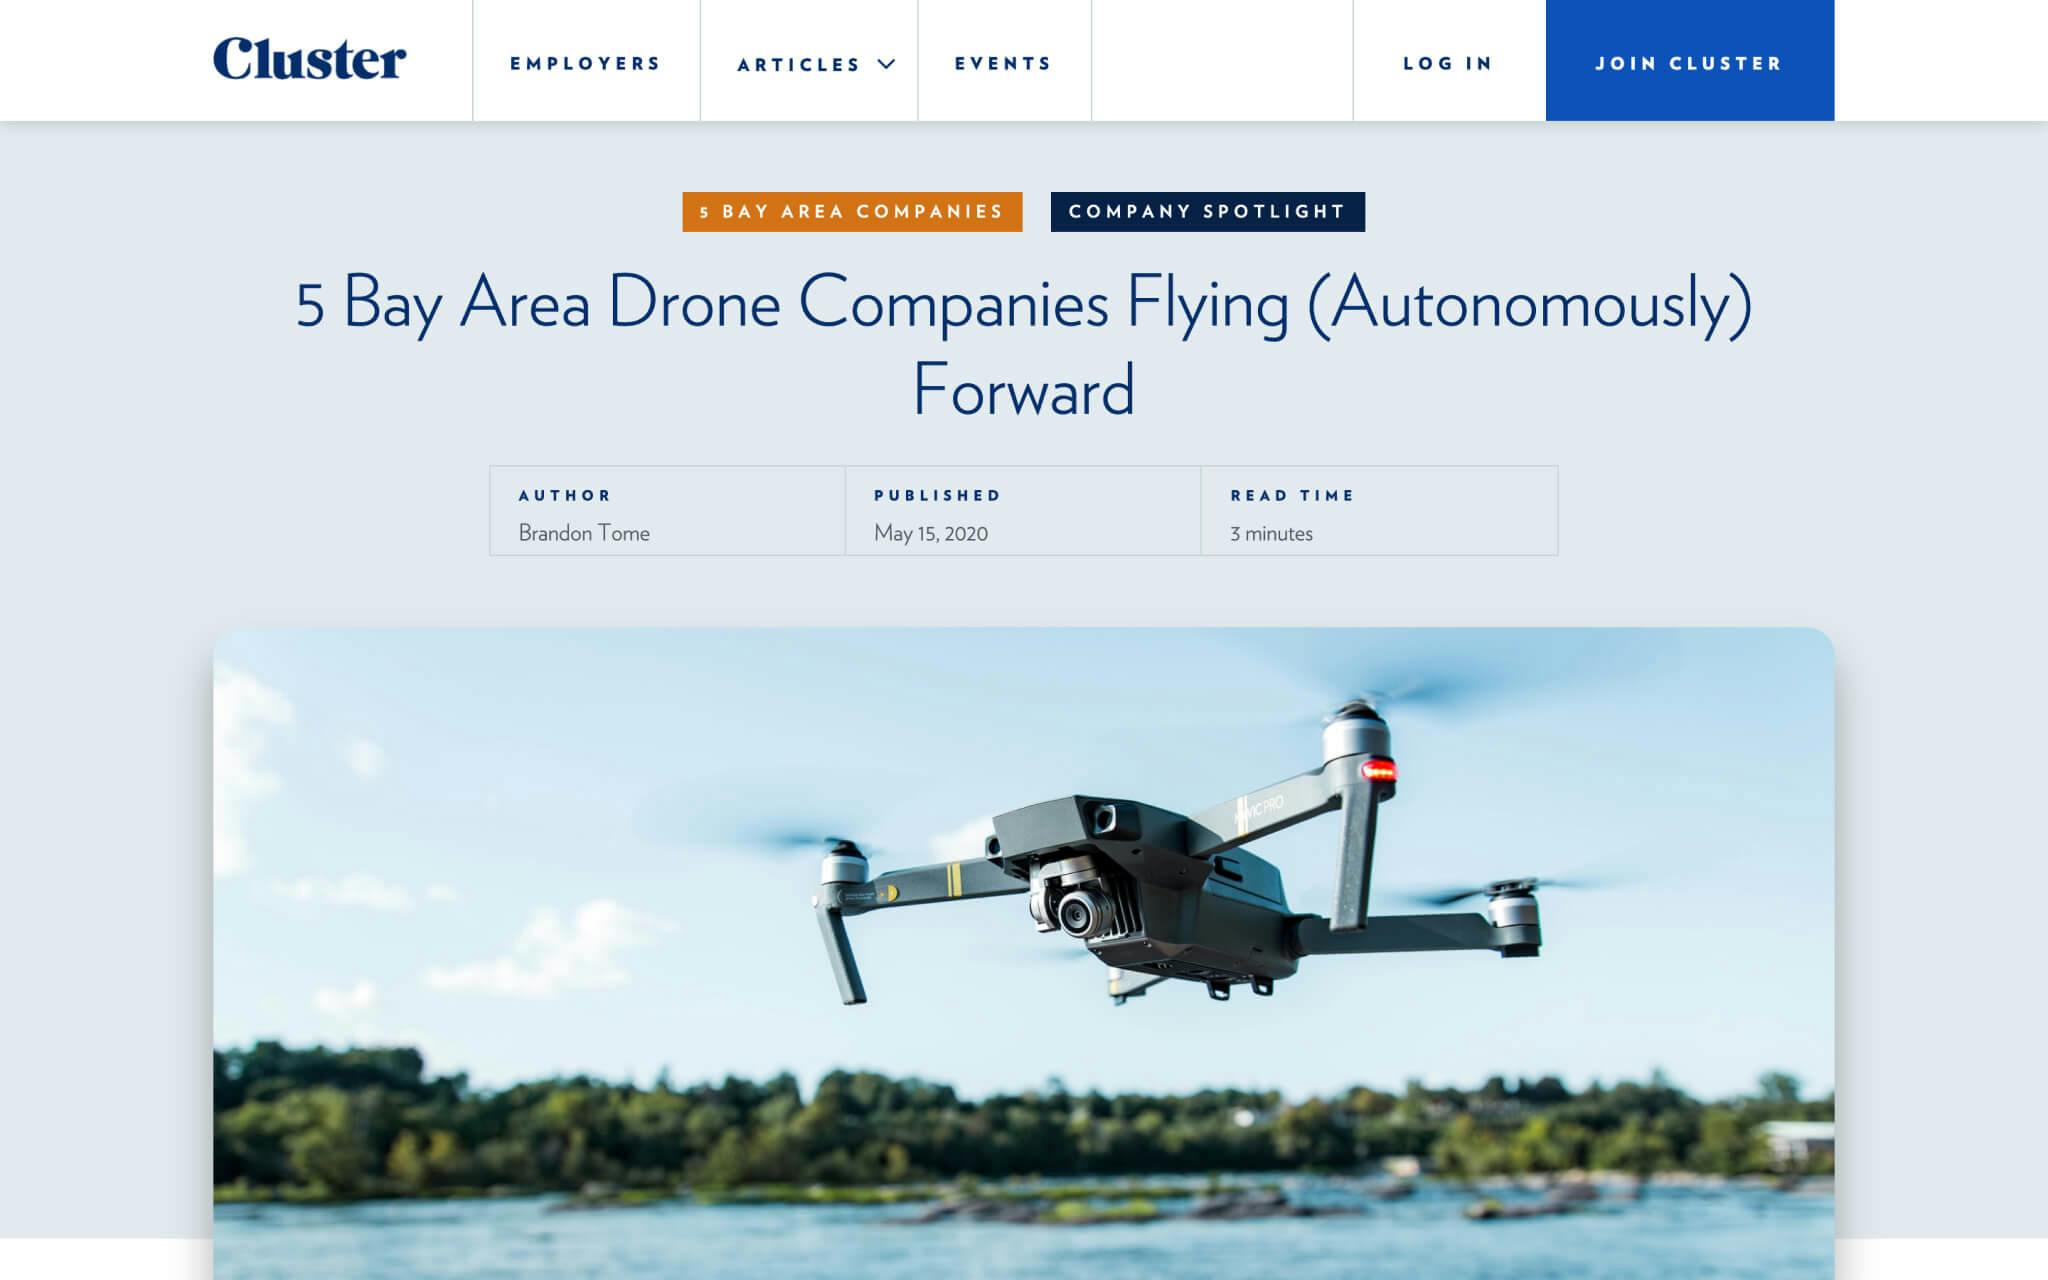 A blog article about 5 bay area drone companies flying forward